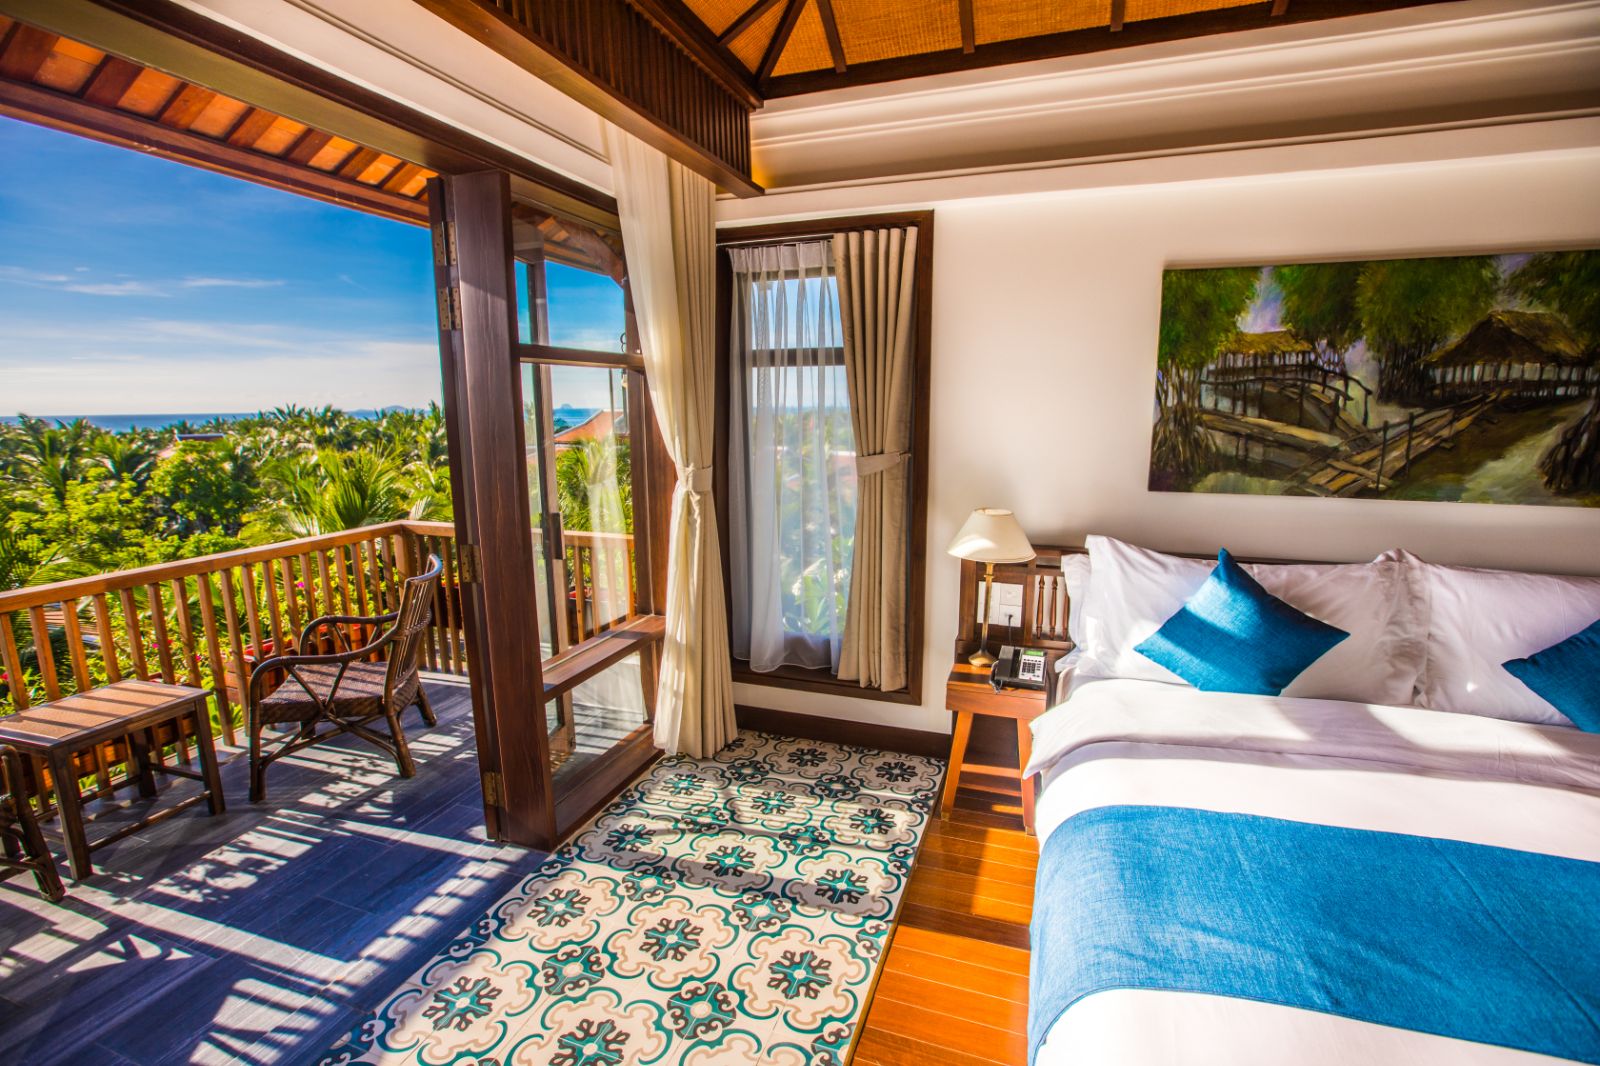 Private villa bedroom and balcony at The Anam resort in Cam Ranh, Vietnam